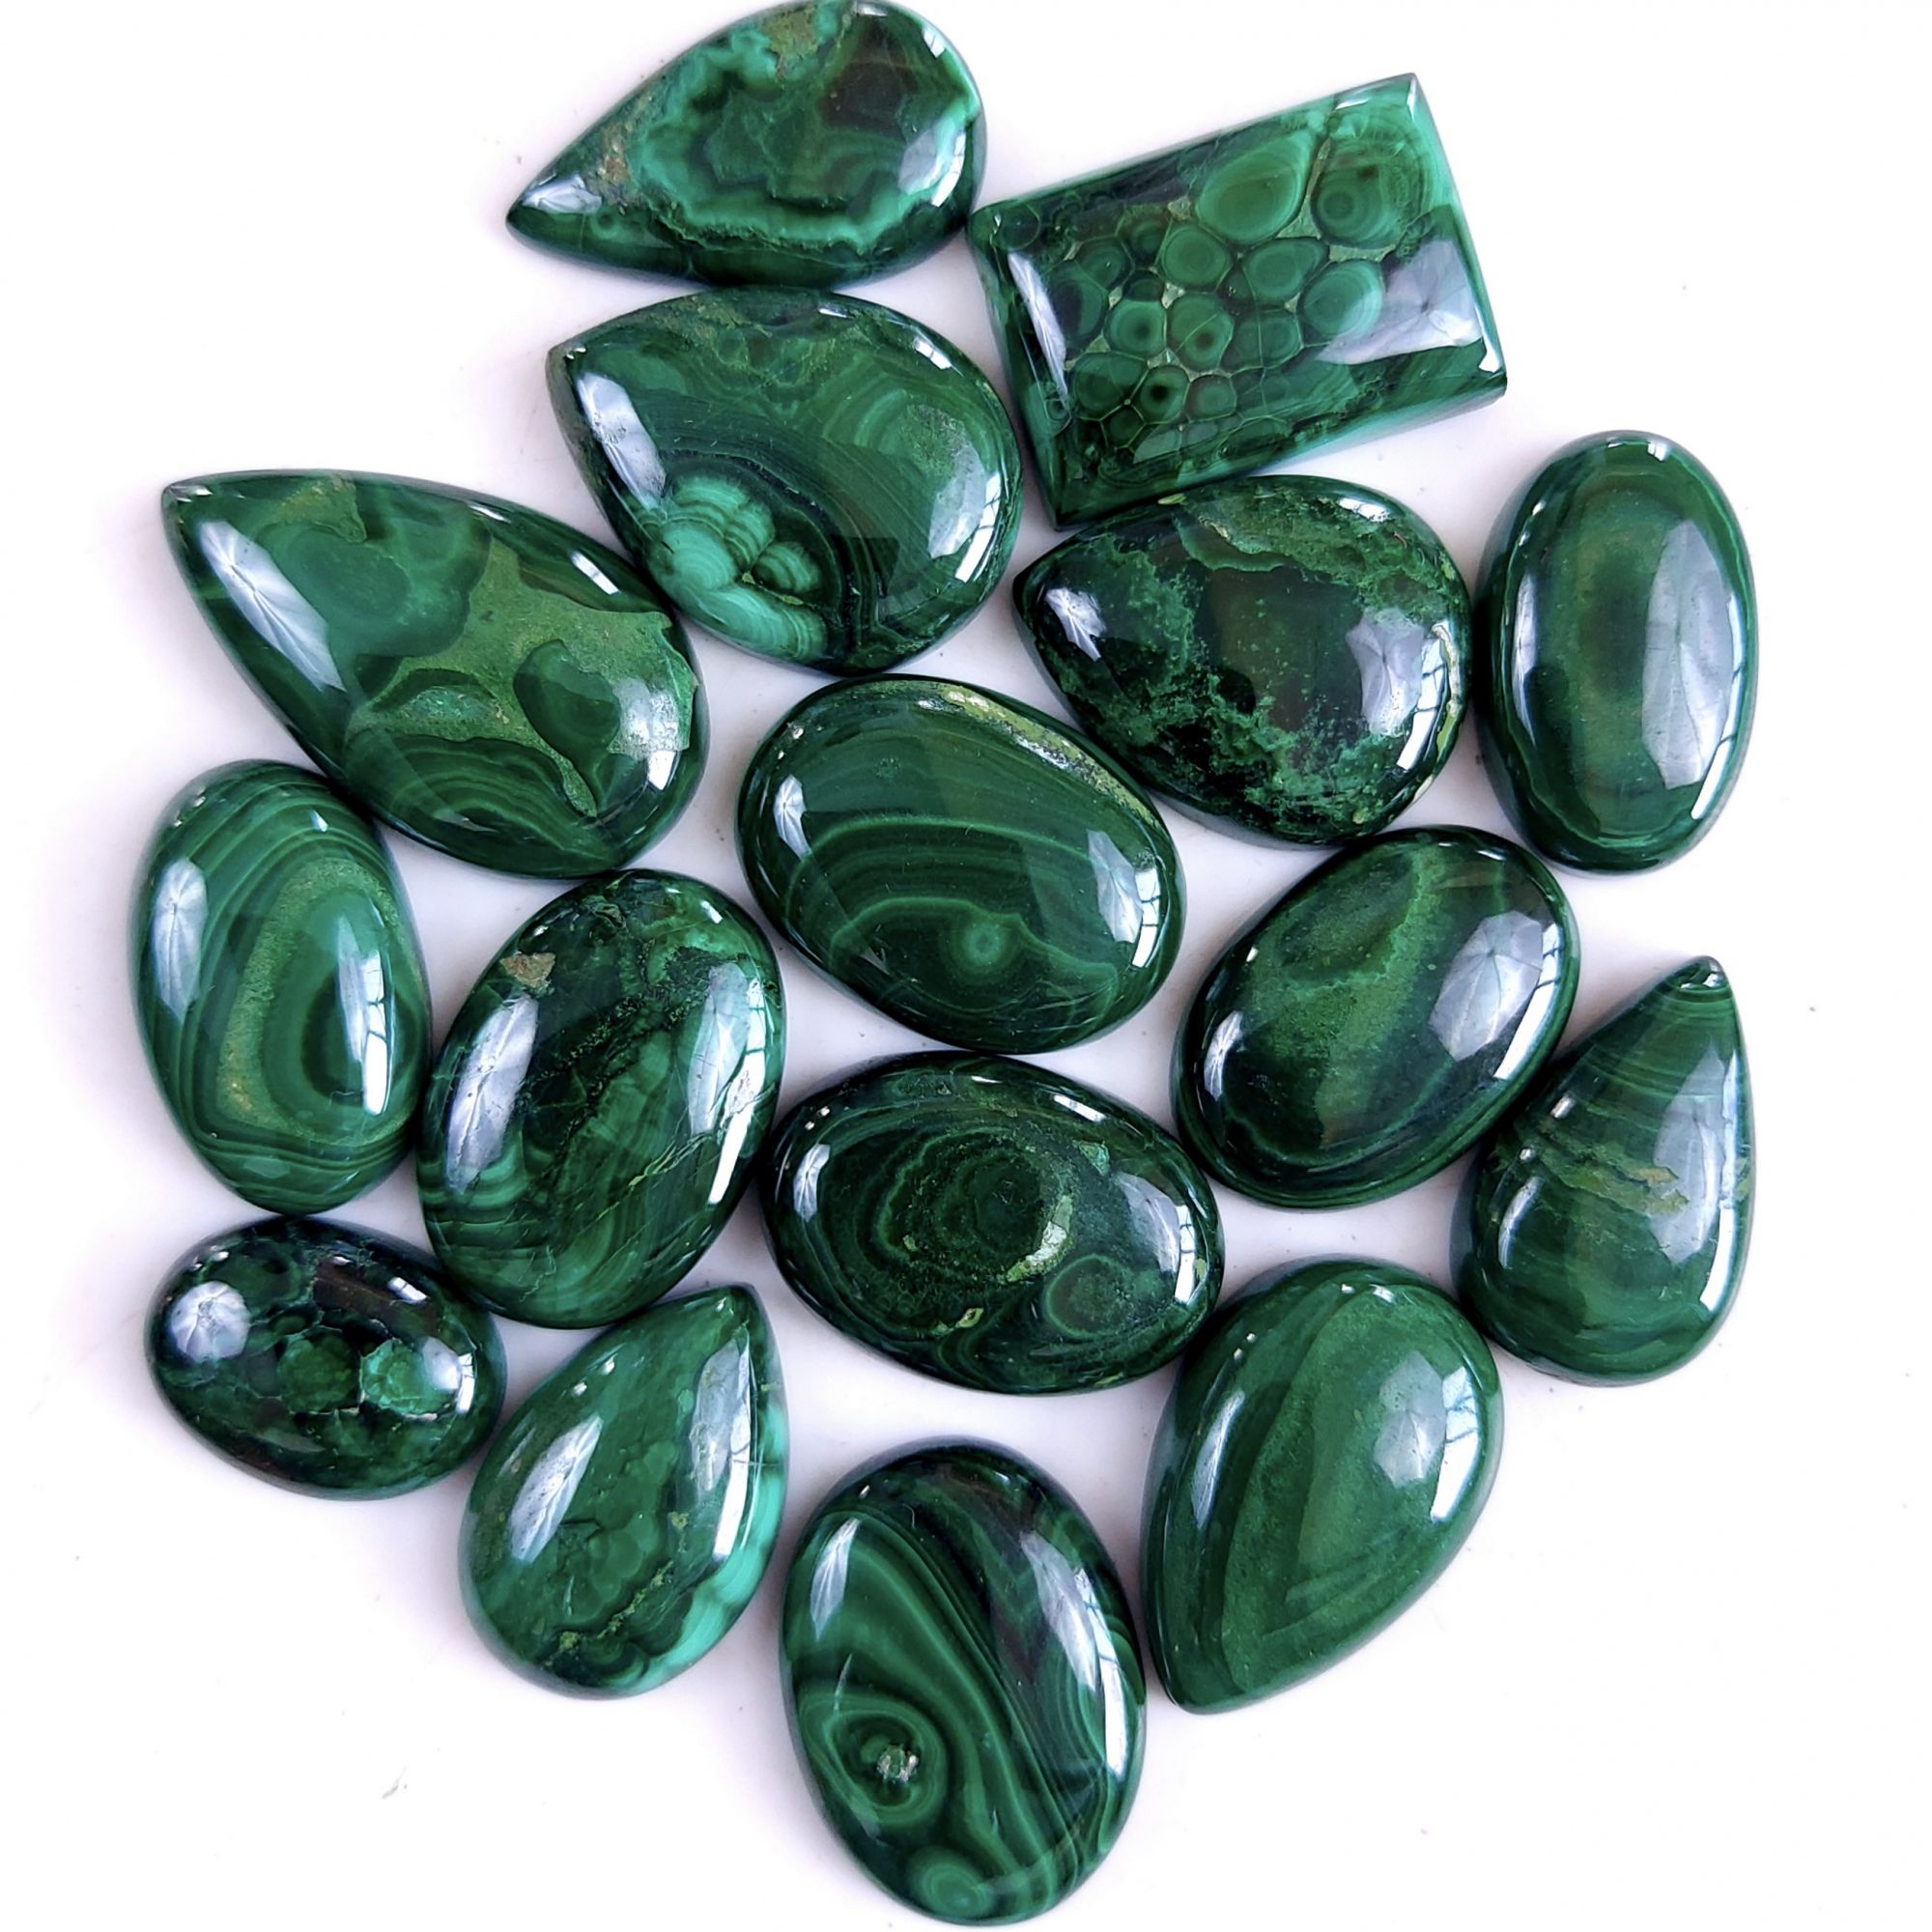 16Pcs 386Cts Natural Green Malachite Flat Back Loose Cabochon Gemstone For Handmade Jewelry Making and Craft Supplies 20x14 16x10mm#9339